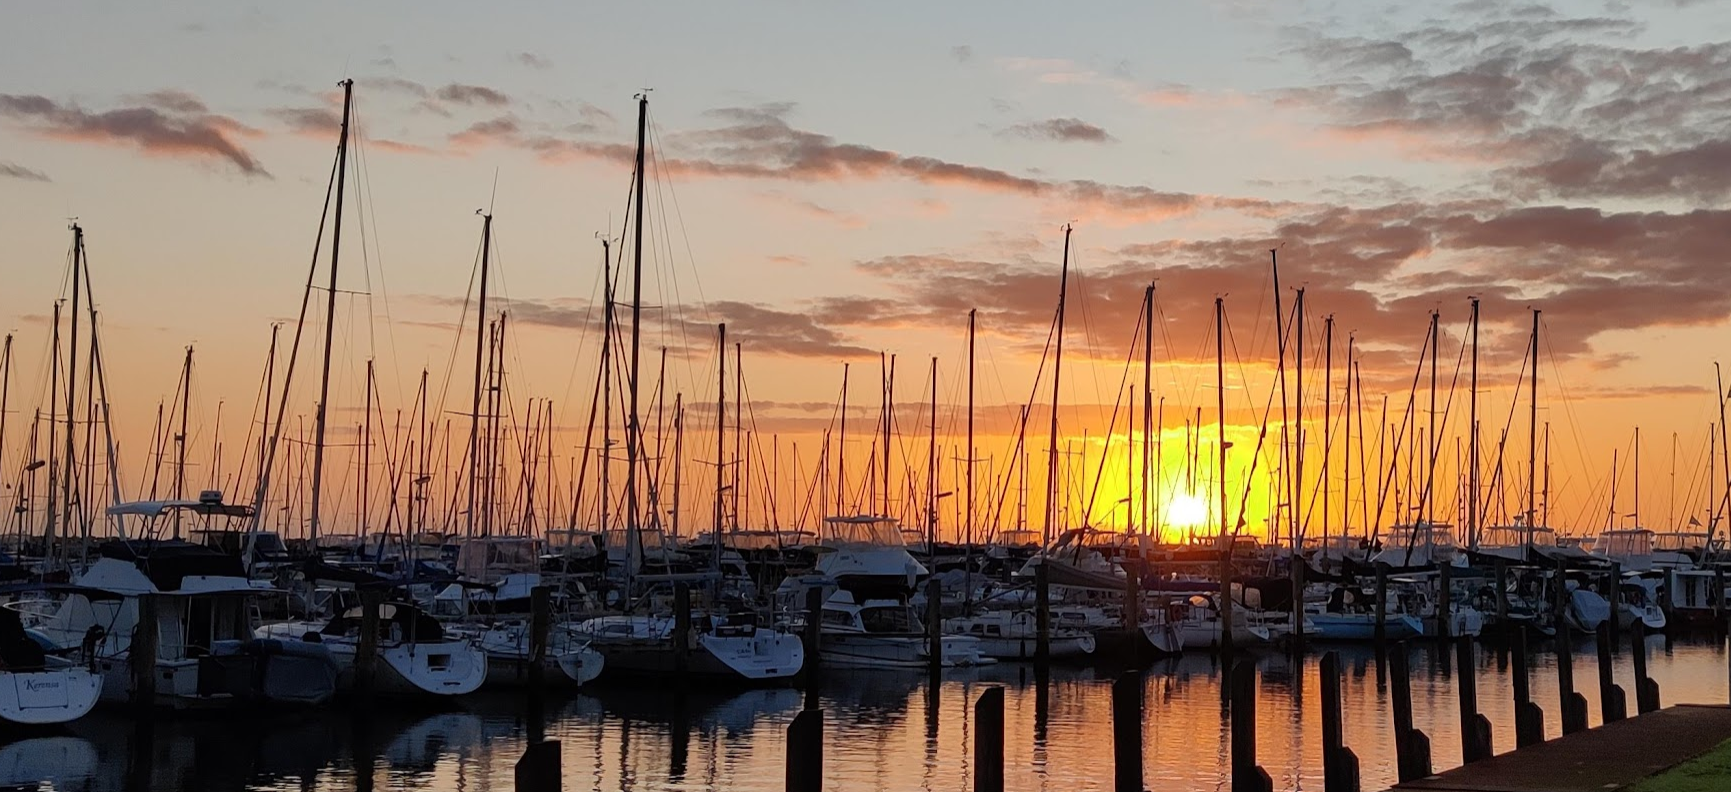 Silhouettes of yachts at sunset